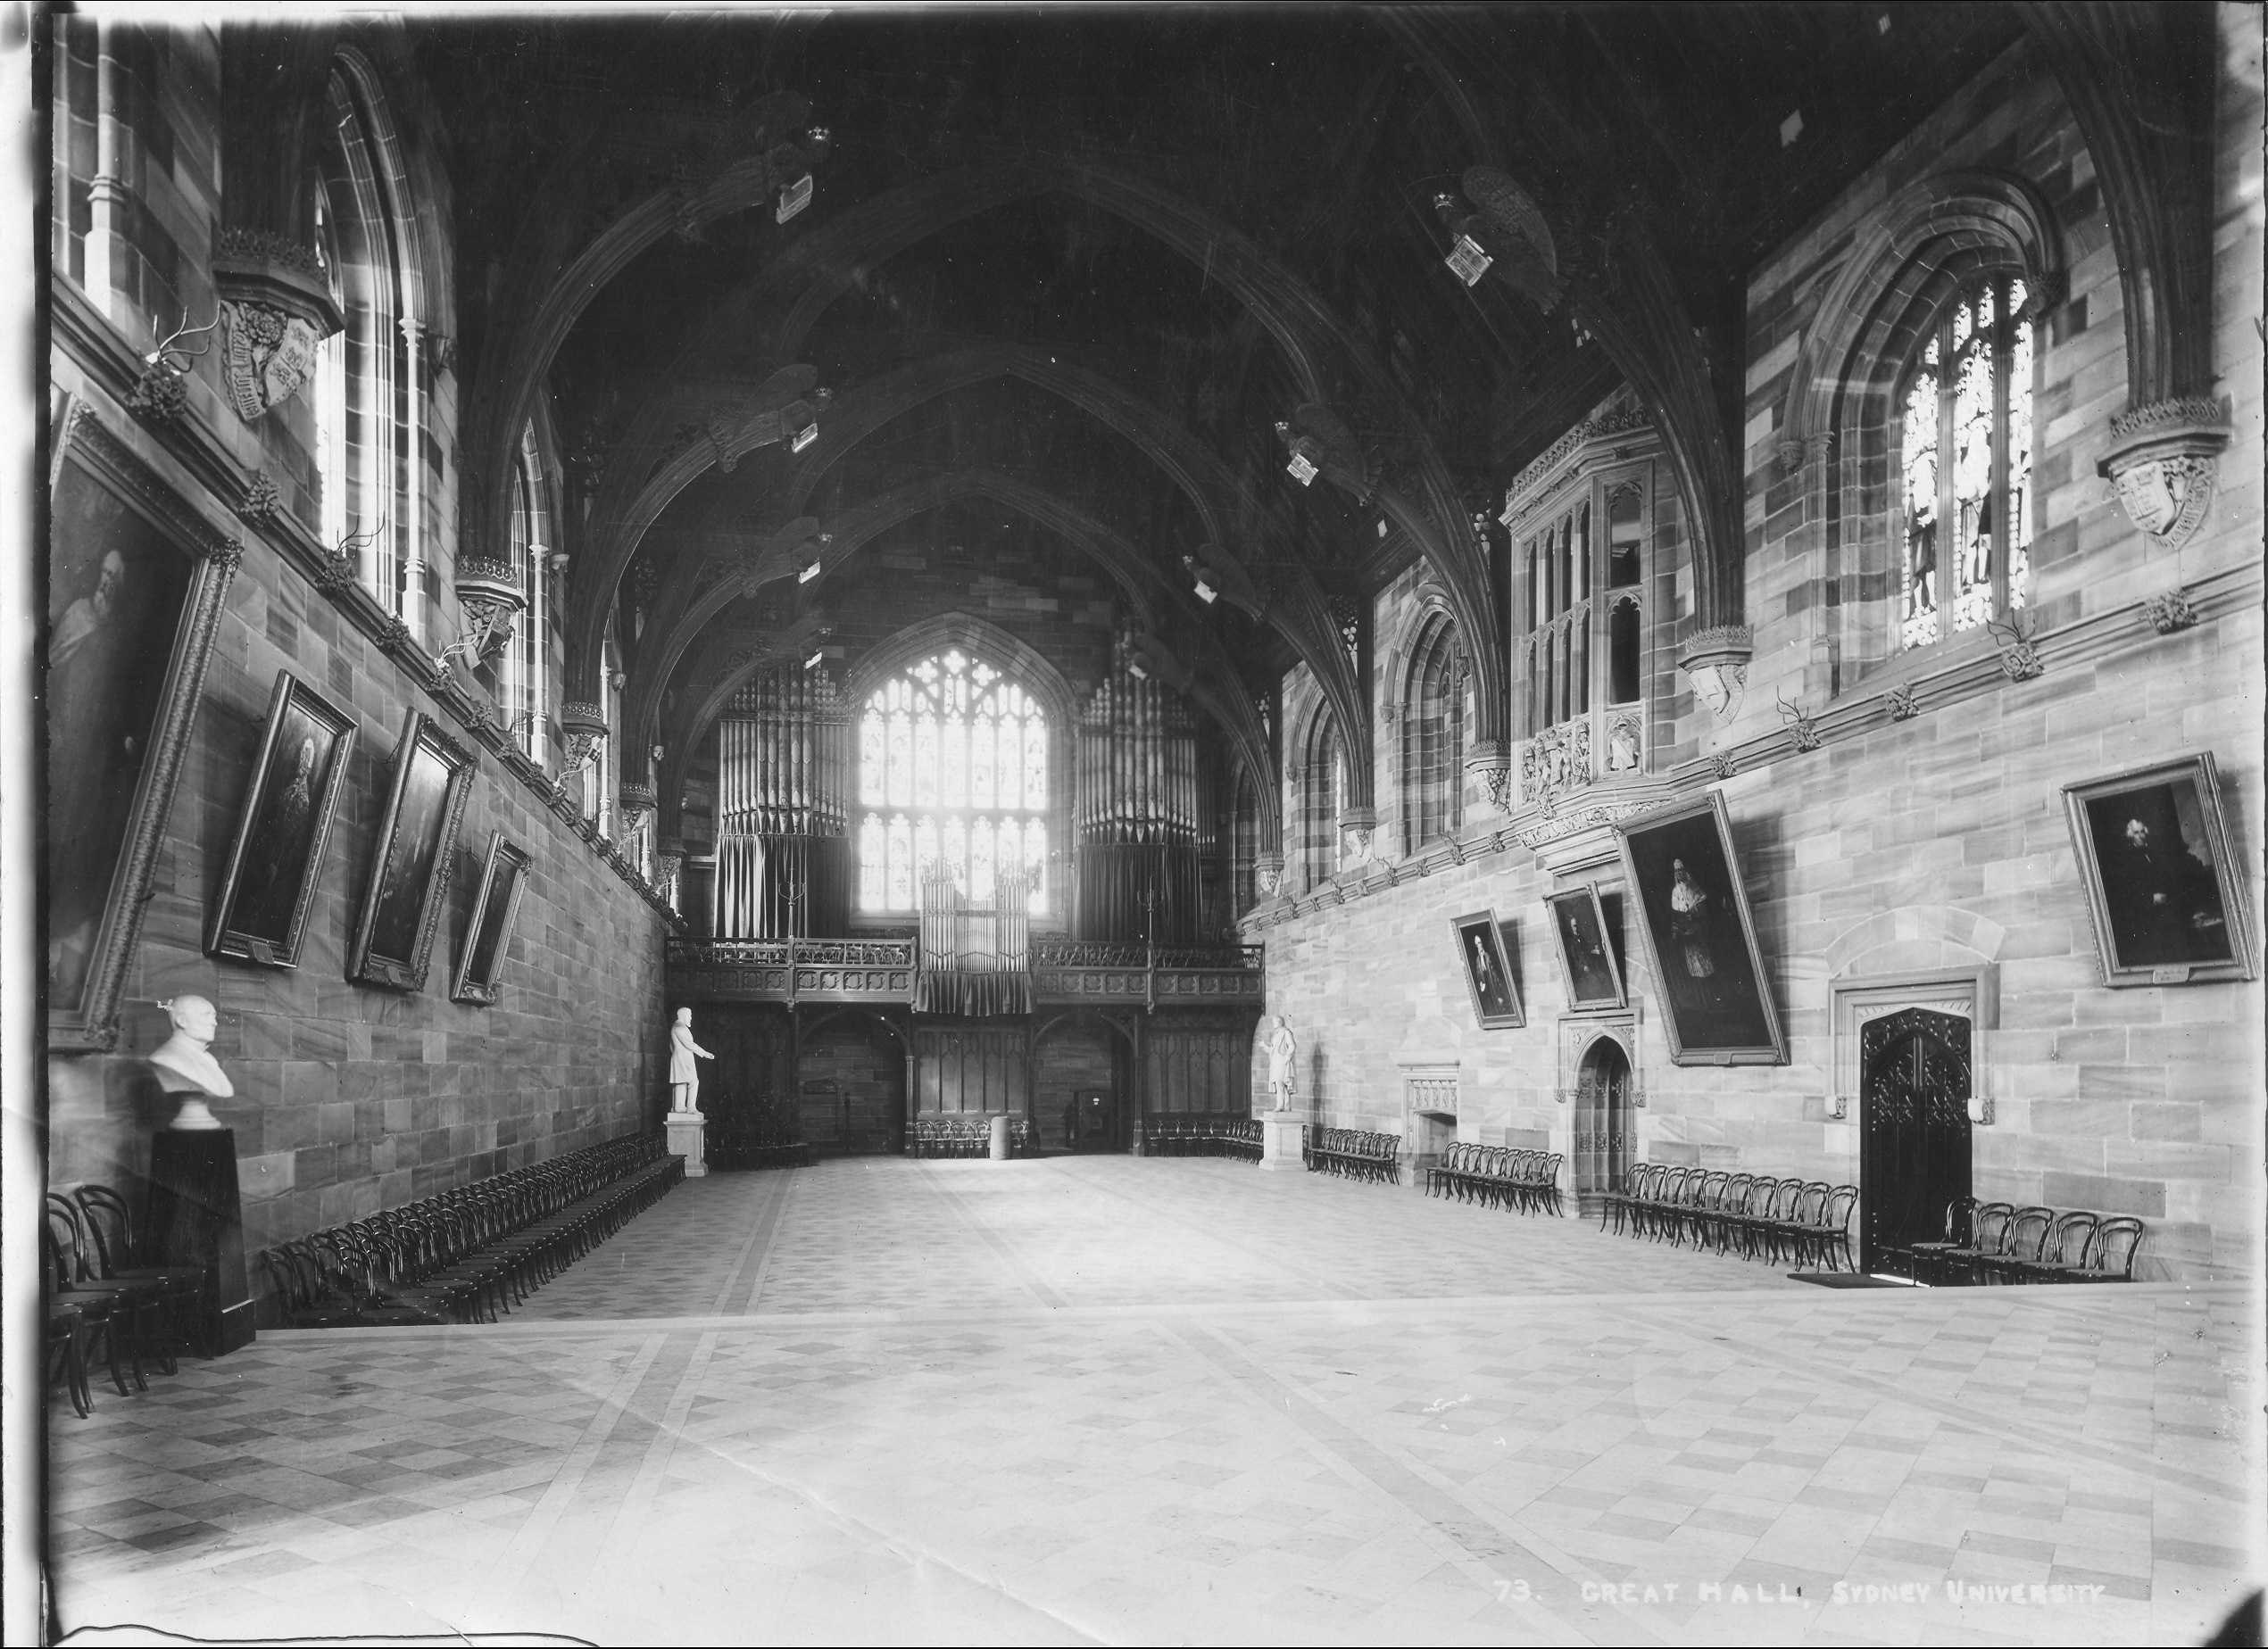 INTERIOR VIEWS OF THE GREAT HALL